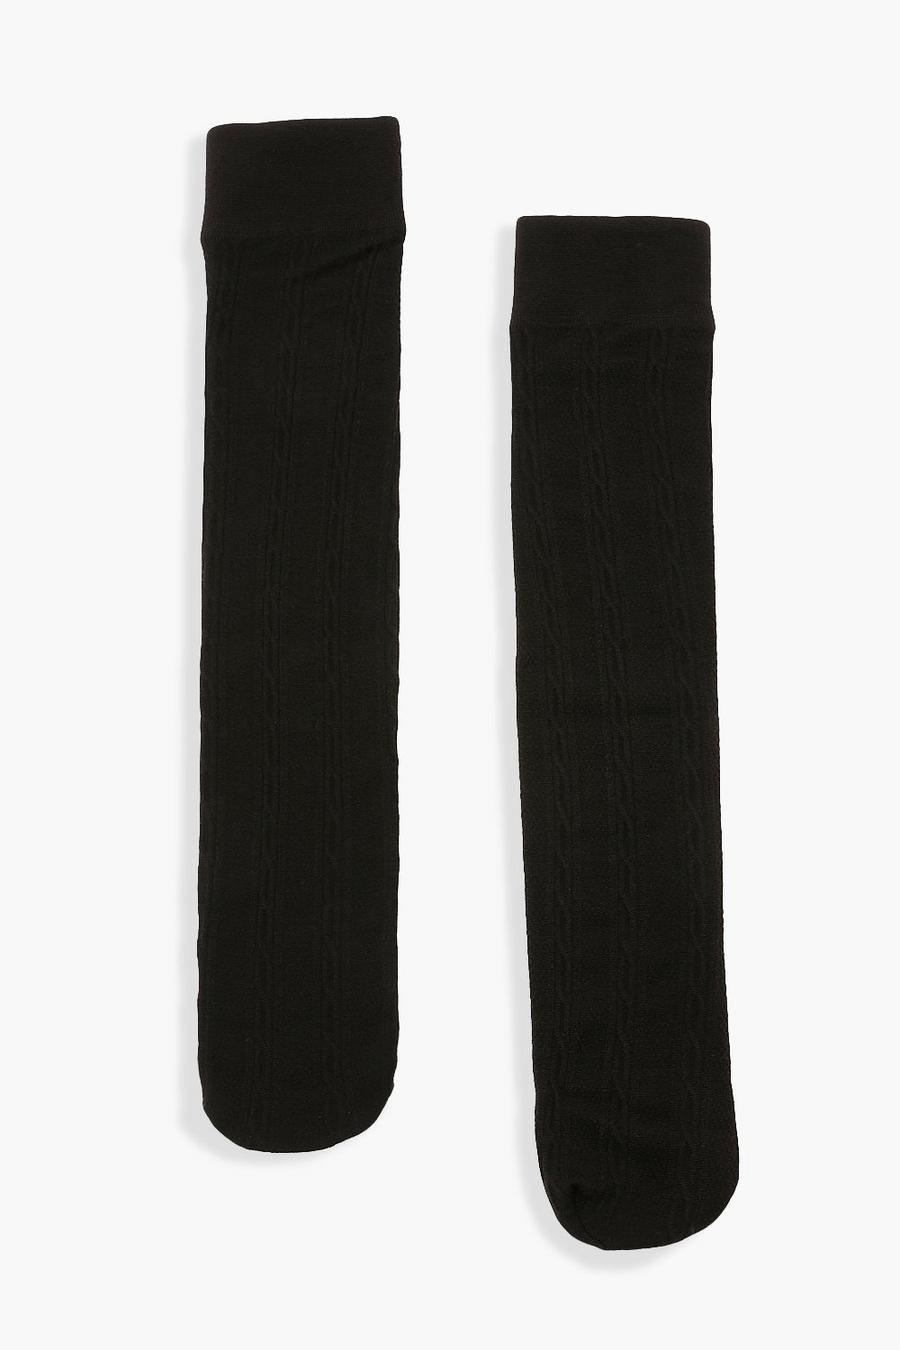 Black 2 Pack Thermal Cable Knit Knee High Socks